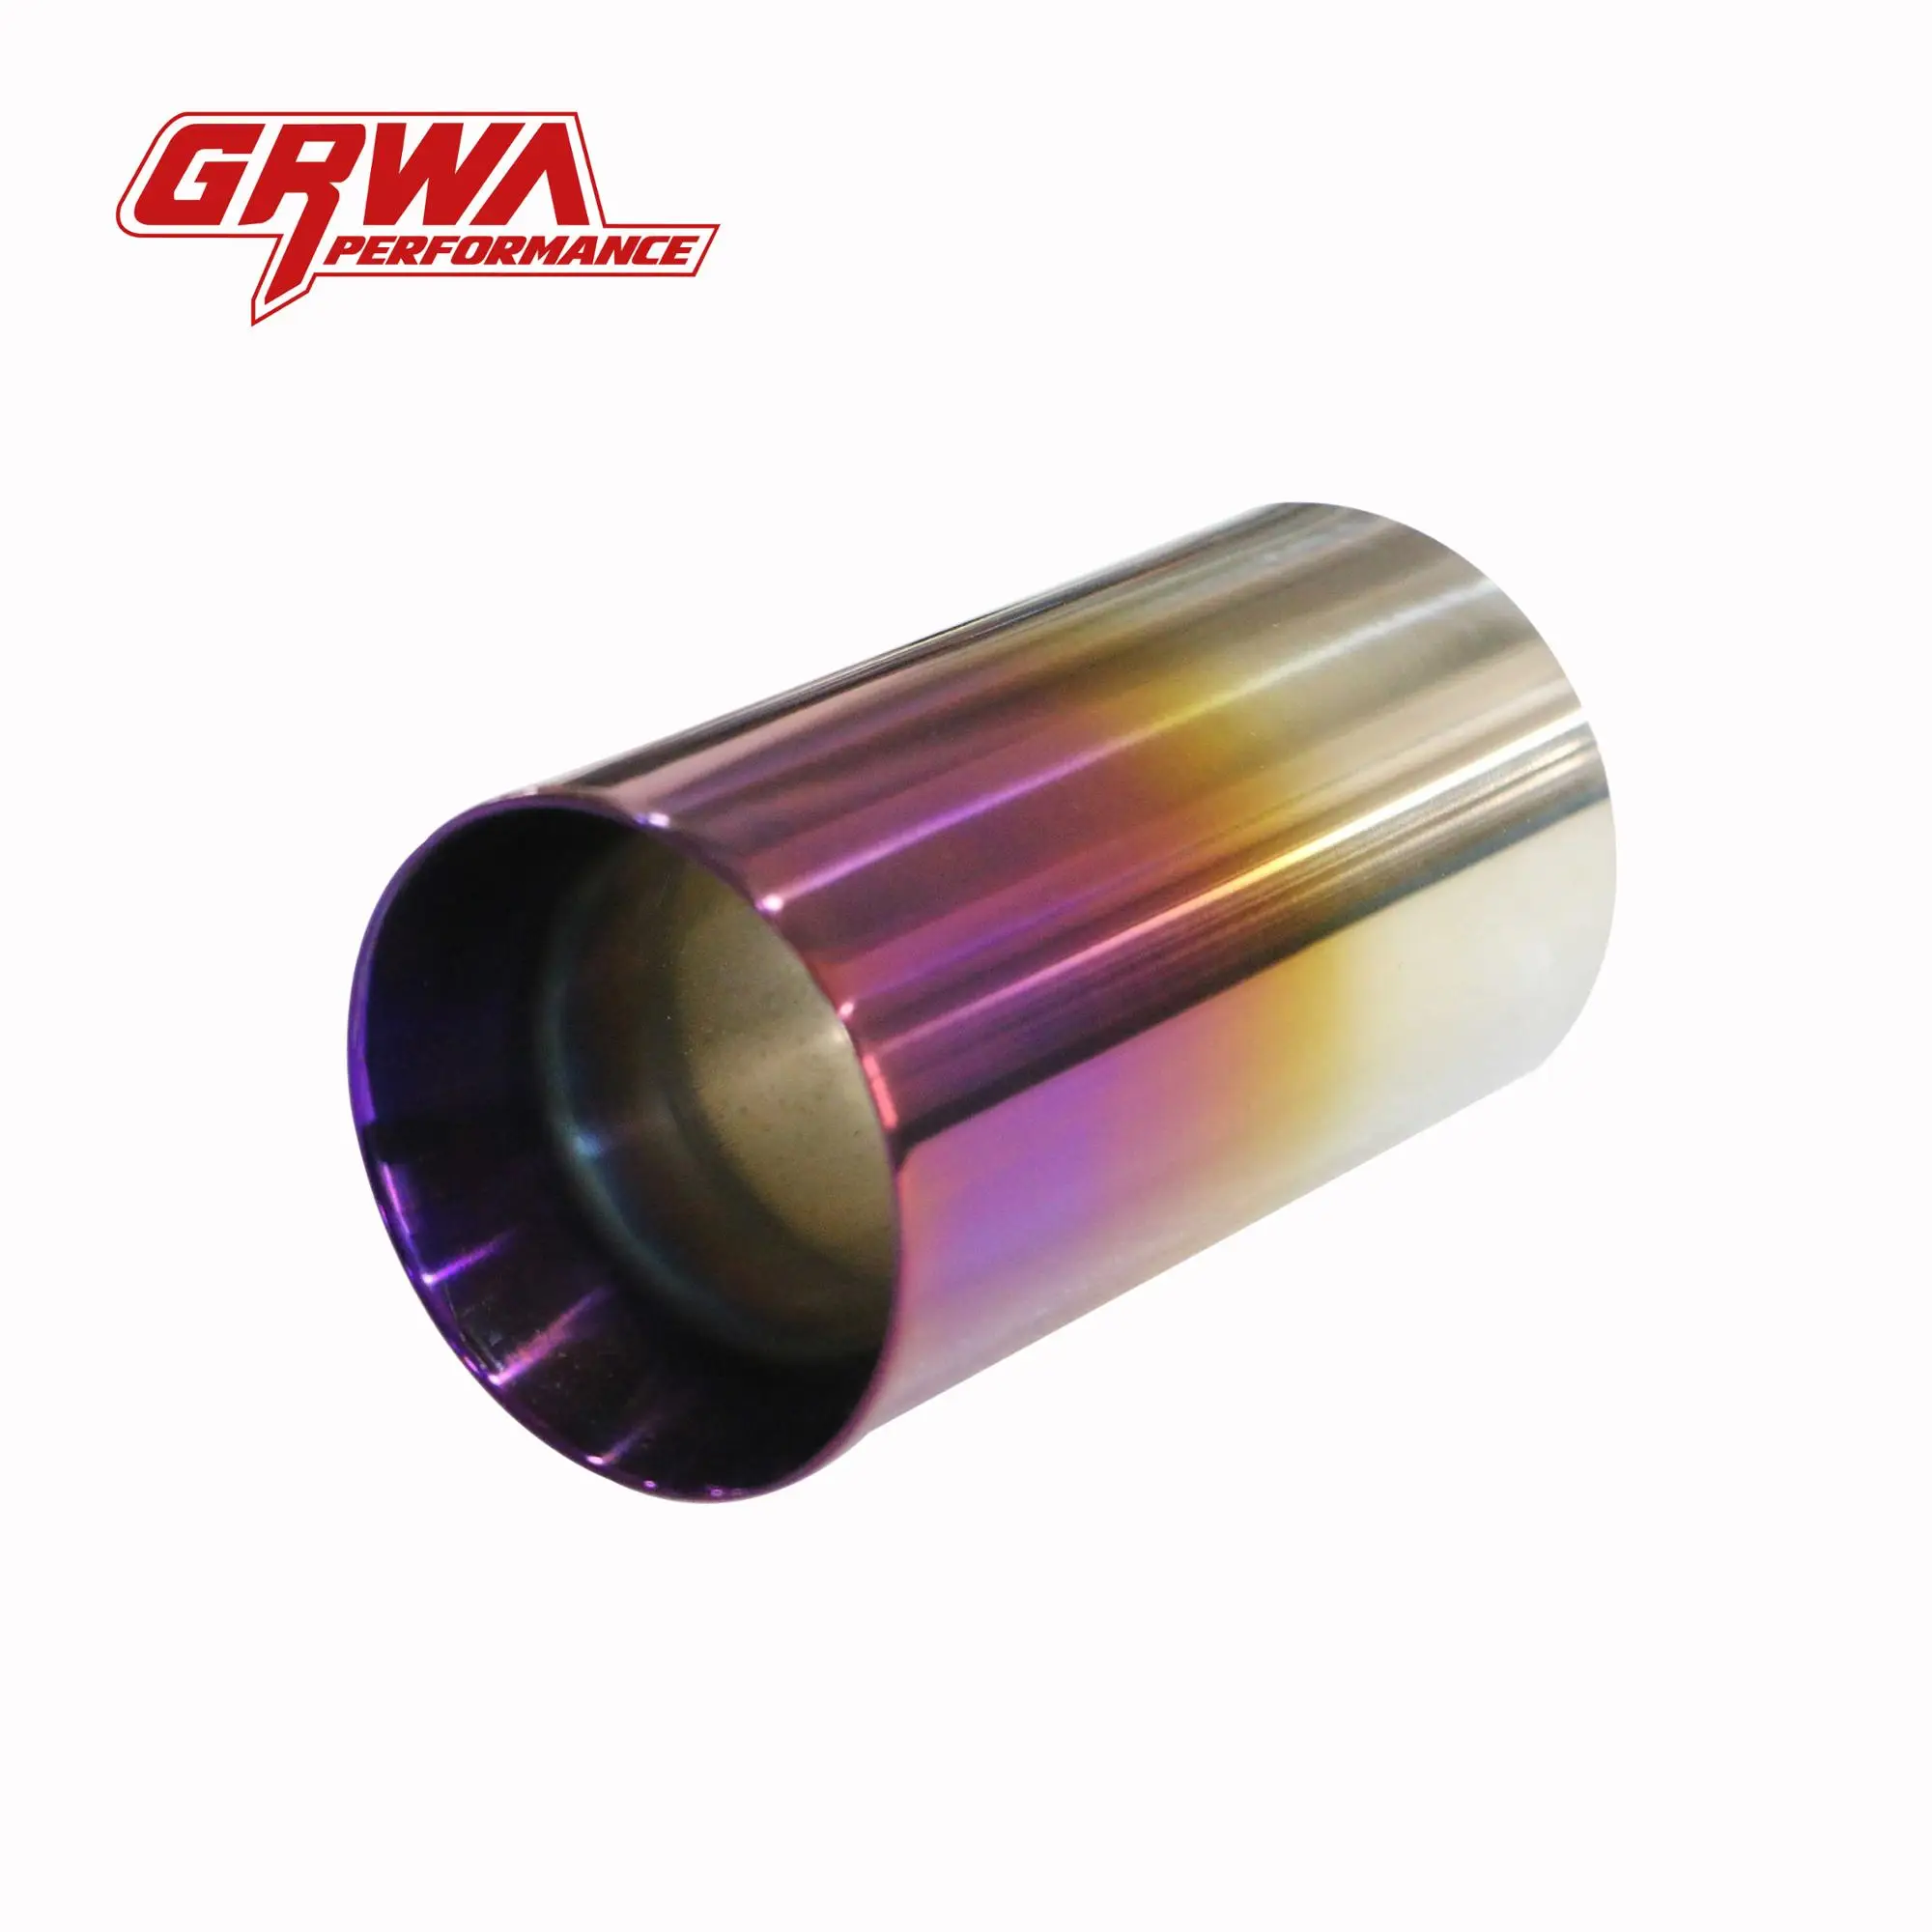 Stainless Steel Exhaust Tip 2 Inch Inlet - Buy Exhaust Tip 2 Inch Inlet